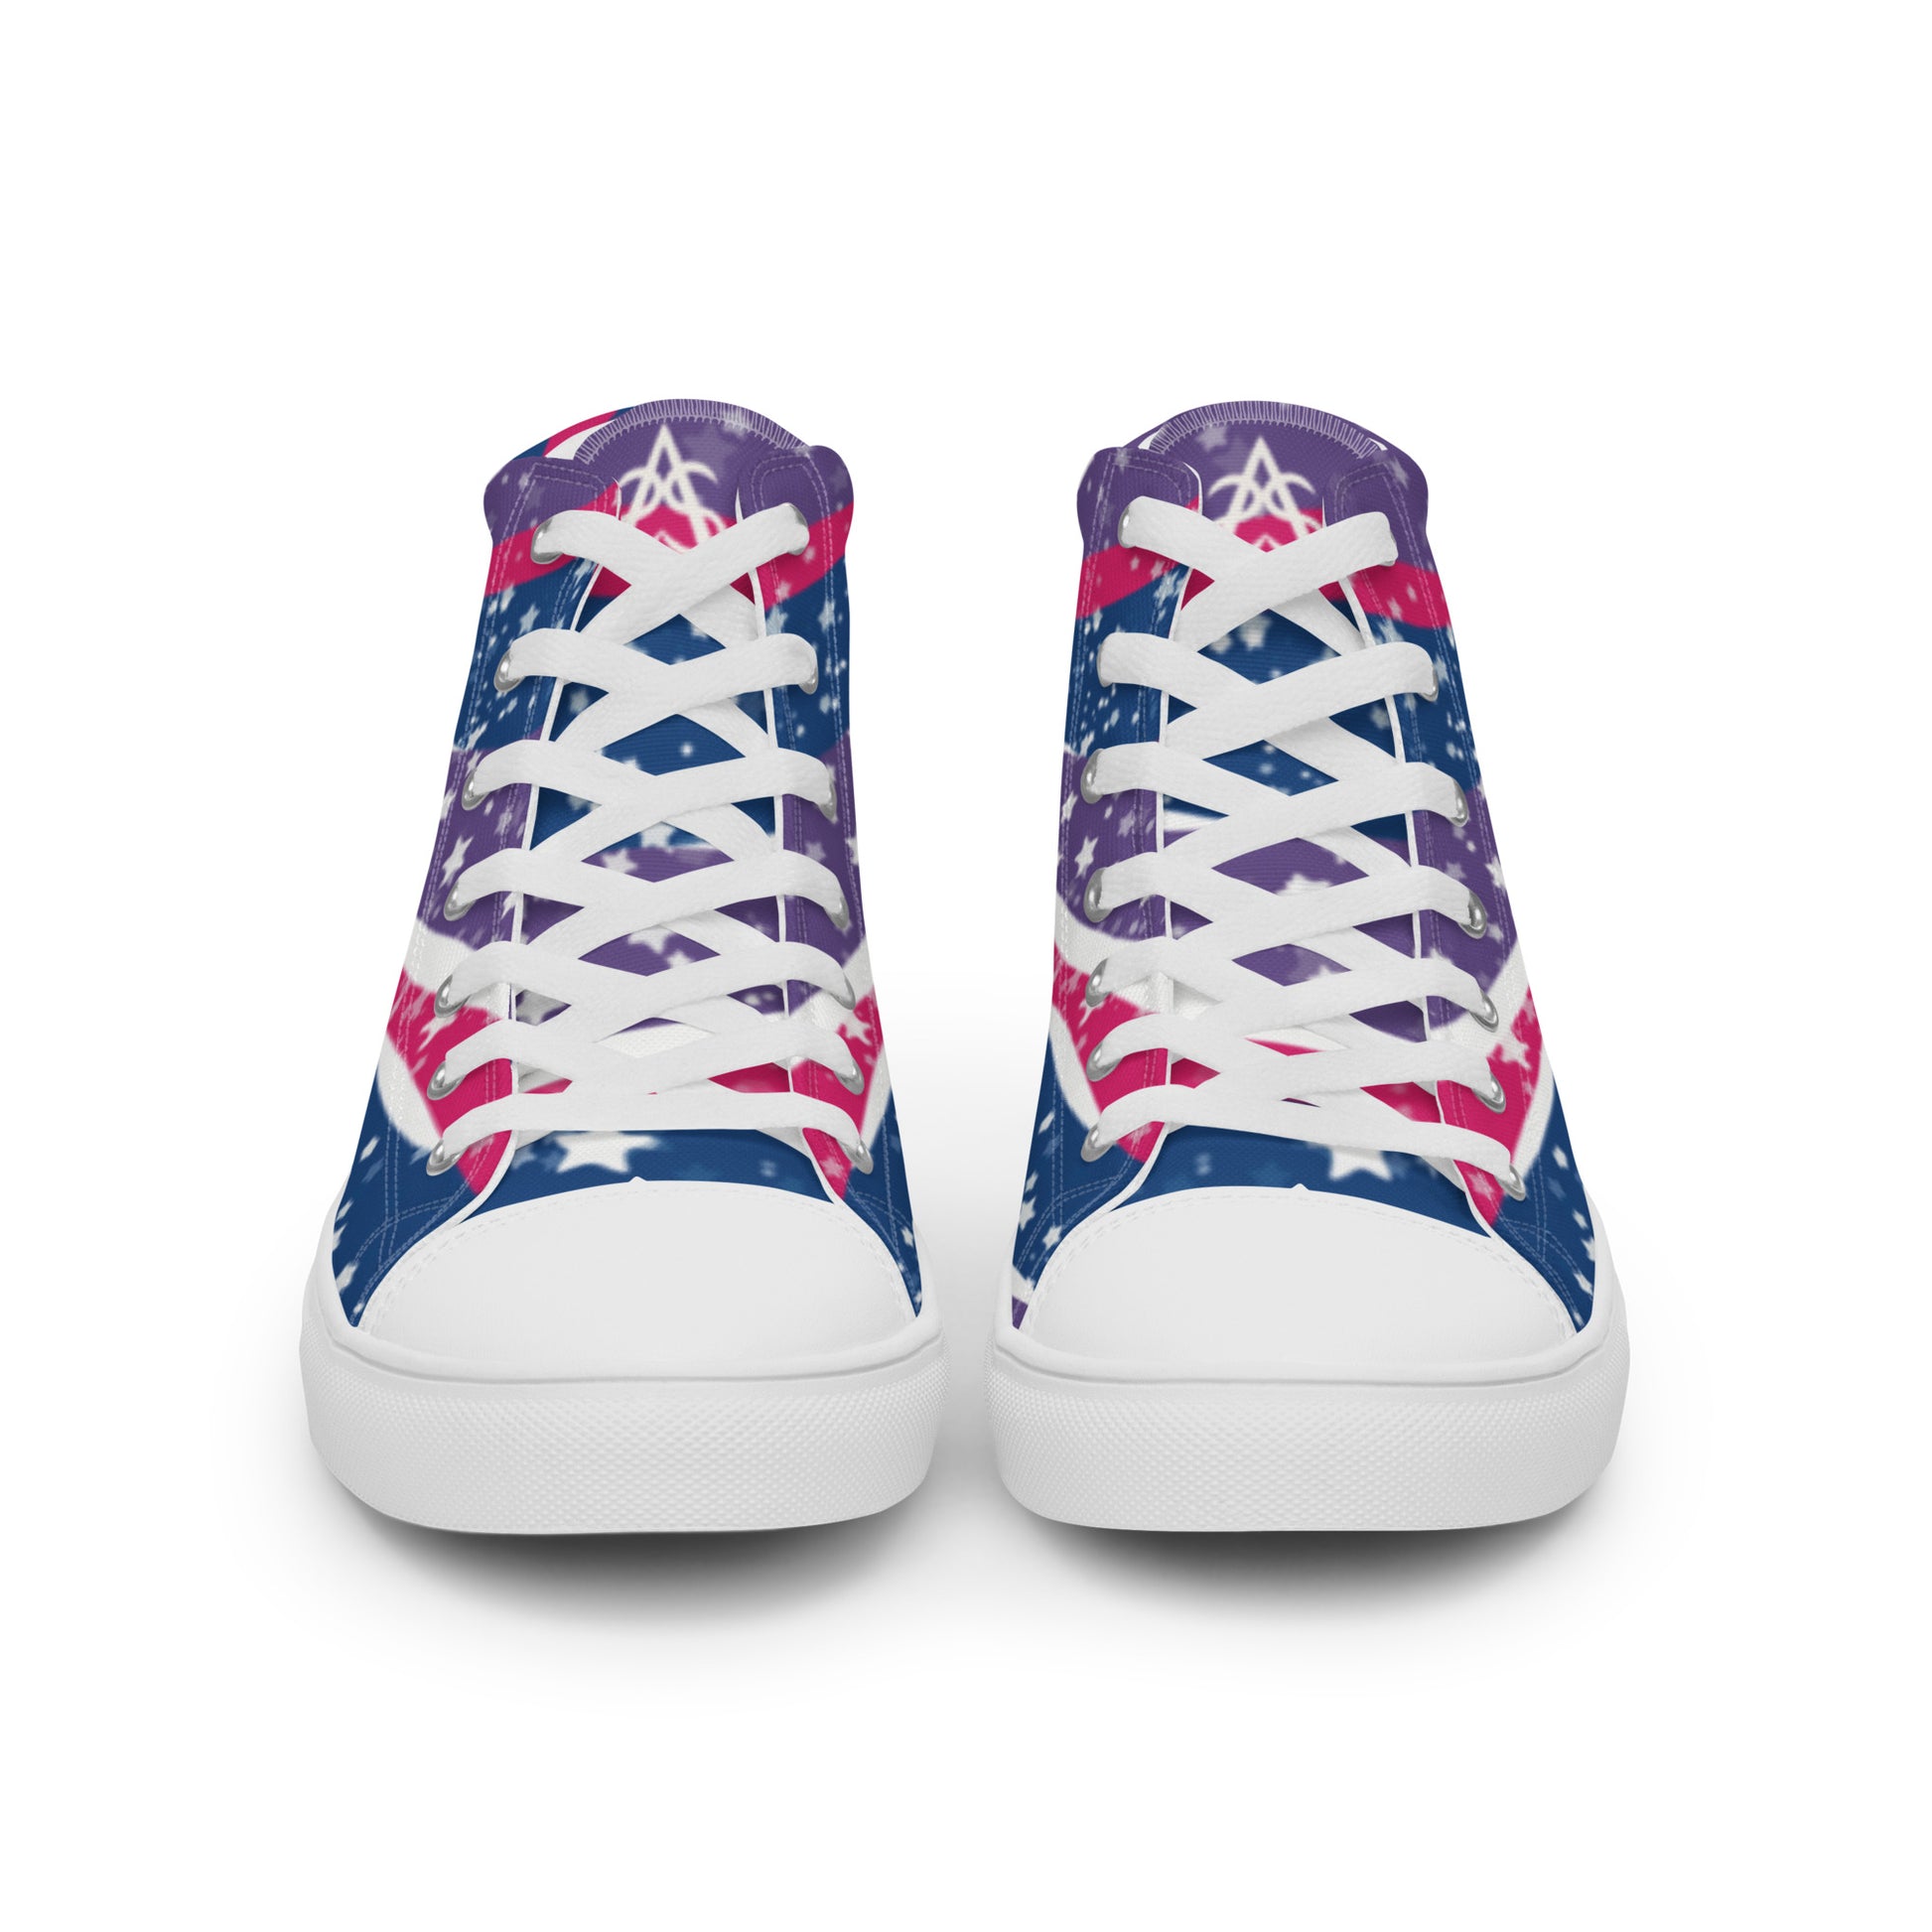 Front view: a pair of high top shoes with pink, purple, and blue ribbons that get larger from heel to laces, white stars, and the Aras Sivad logo on the tongue.